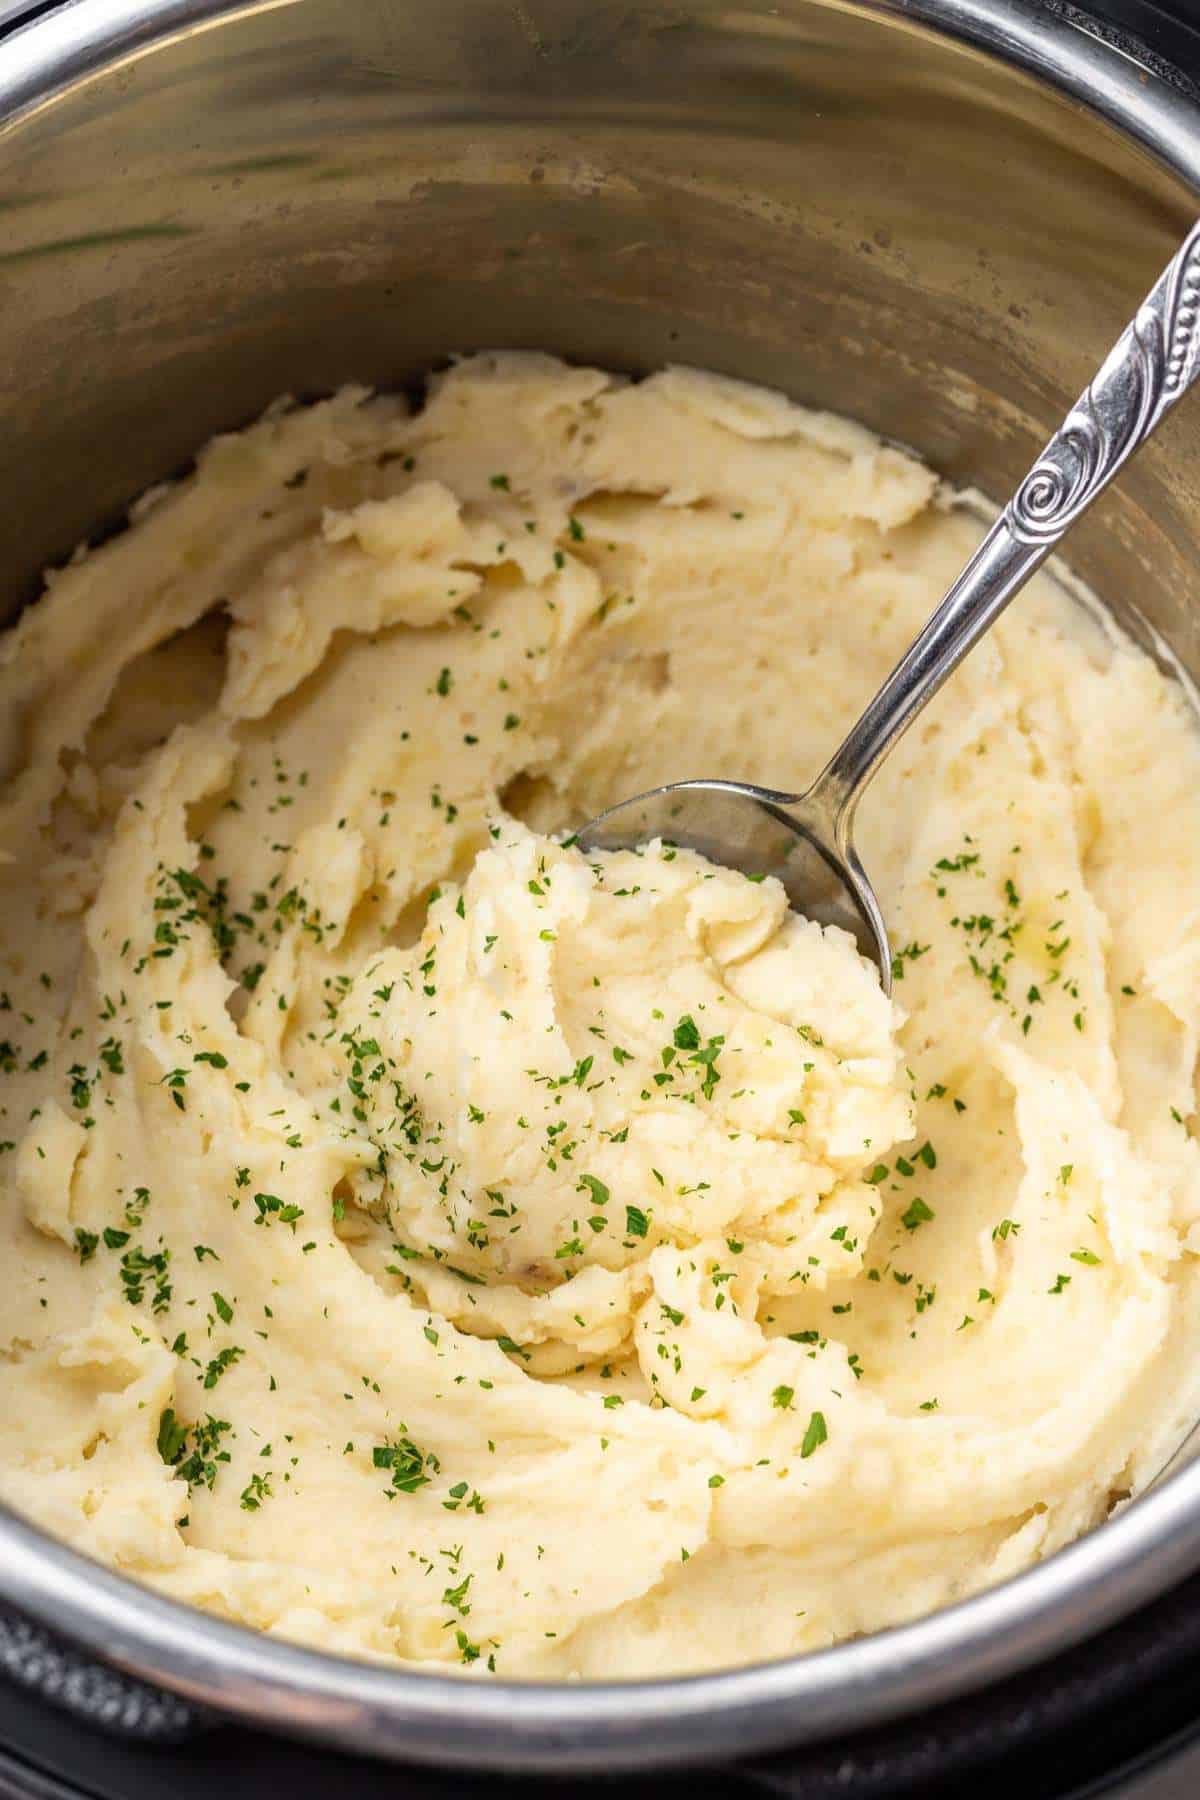 Final mashed potatoes recipe for topping lentil filling.